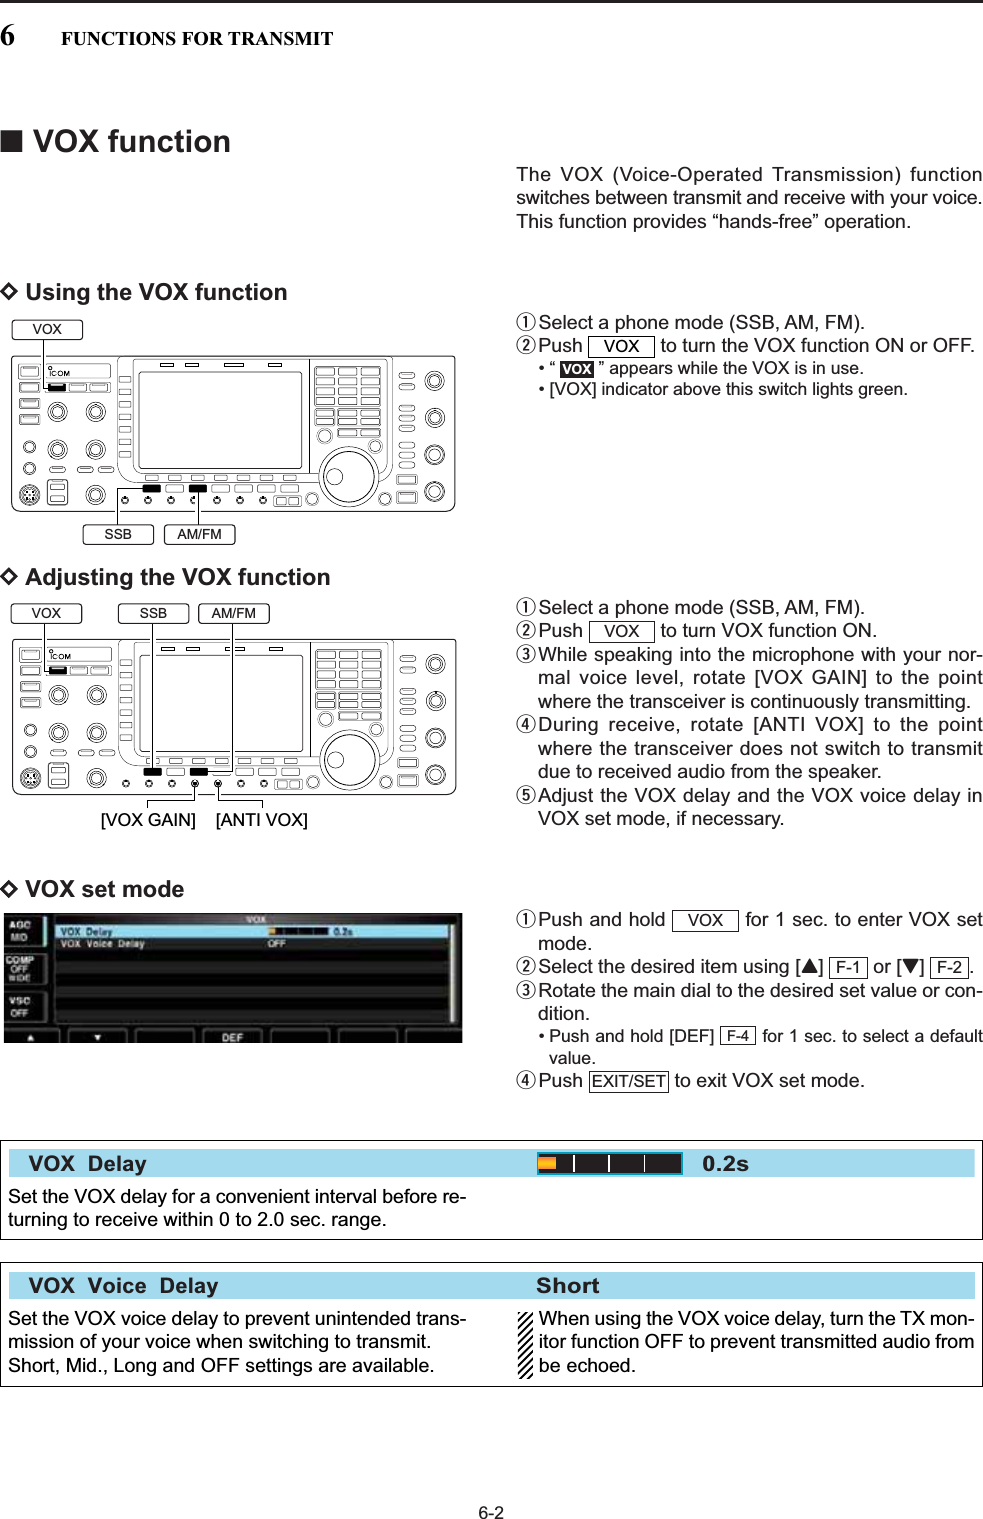 6-2■VOX functionThe VOX (Voice-Operated Transmission) functionswitches between transmit and receive with your voice.This function provides “hands-free” operation.DUsing the VOX functionqSelect a phone mode (SSB, AM, FM).wPush  to turn the VOX function ON or OFF.• “  ” appears while the VOX is in use.• [VOX] indicator above this switch lights green.DAdjusting the VOX functionqSelect a phone mode (SSB, AM, FM).wPush  to turn VOX function ON.eWhile speaking into the microphone with your nor-mal voice level, rotate [VOX GAIN] to the pointwhere the transceiver is continuously transmitting.rDuring receive, rotate [ANTI VOX] to the pointwhere the transceiver does not switch to transmitdue to received audio from the speaker.tAdjust the VOX delay and the VOX voice delay inVOX set mode, if necessary.DVOX set modeqPush and hold  for 1 sec. to enter VOX setmode.wSelect the desired item using [Y] or [Z] .eRotate the main dial to the desired set value or con-dition.• Push and hold [DEF]  for 1 sec. to select a defaultvalue.rPush  to exit VOX set mode.EXIT/SETF-4F-2F-1VOXVOXVOXVOX[VOX GAIN] [ANTI VOX]AM/FMSSBVOXAM/FMSSBVOX6FUNCTIONS FOR TRANSMITSet the VOX delay for a convenient interval before re-turning to receive within 0 to 2.0 sec. range.VOX  Delay0.2sSet the VOX voice delay to prevent unintended trans-mission of your voice when switching to transmit.Short, Mid., Long and OFF settings are available.When using the VOX voice delay, turn the TX mon-itor function OFF to prevent transmitted audio frombe echoed.VOX  Voice  DelayShort